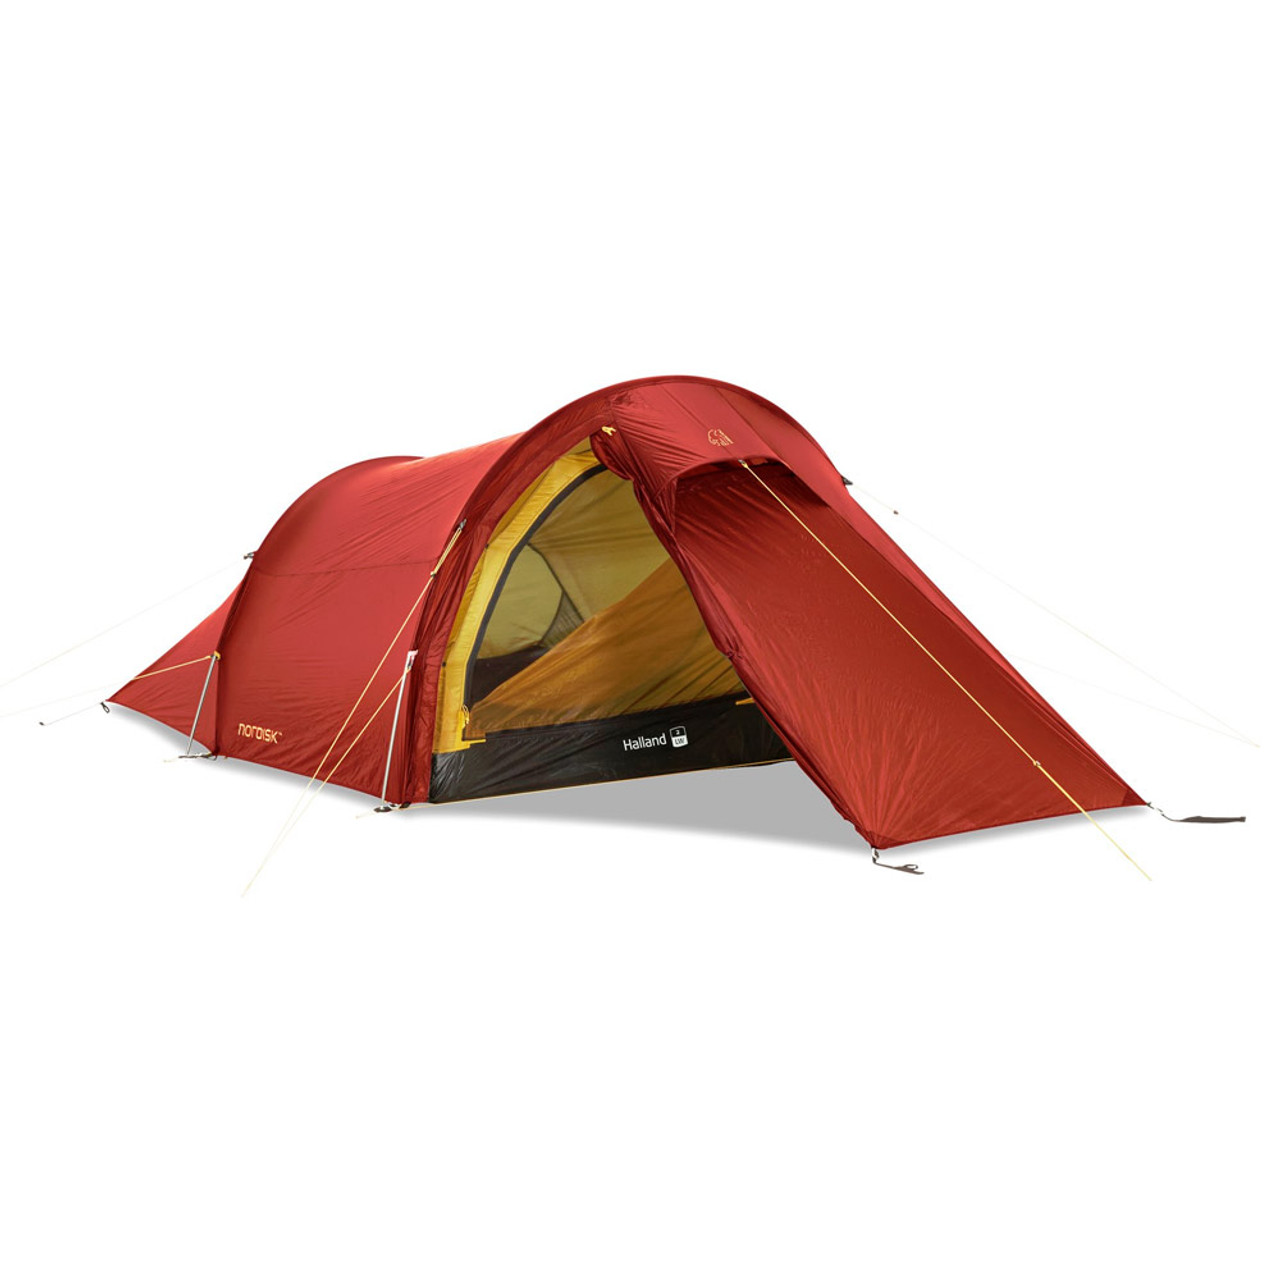 Halland 2 LW Tent Forest Green - テント・タープ